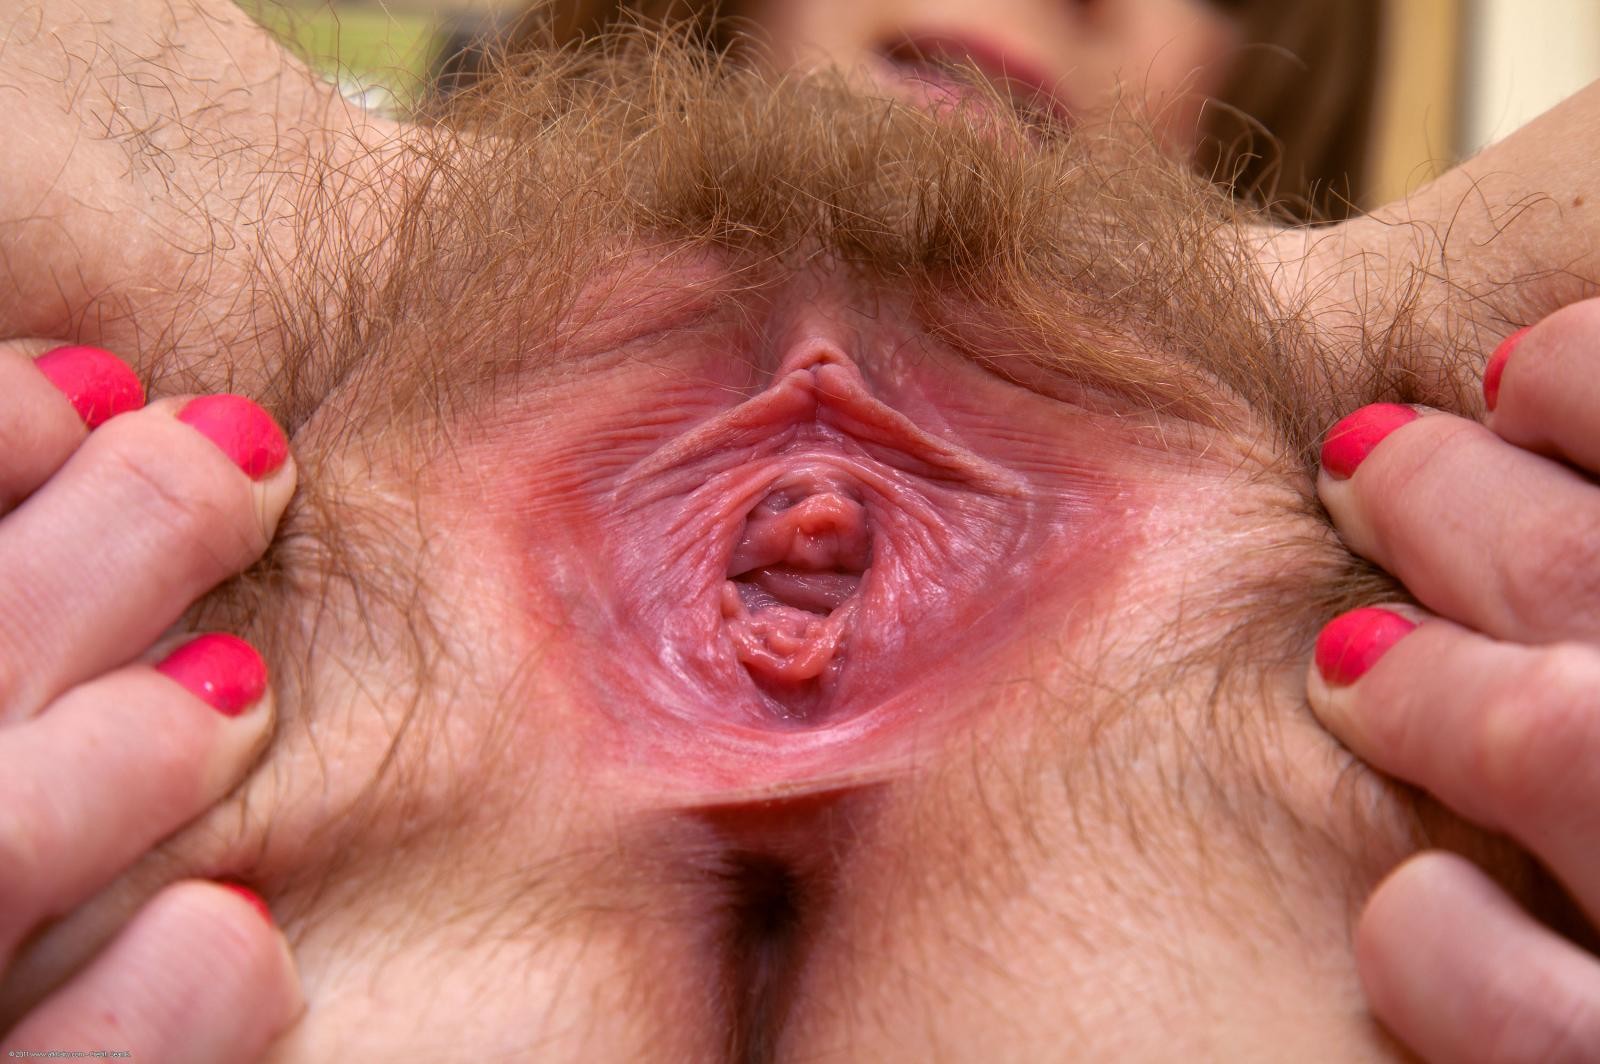 Natural amateur spreading hairy pussy wide #68439164